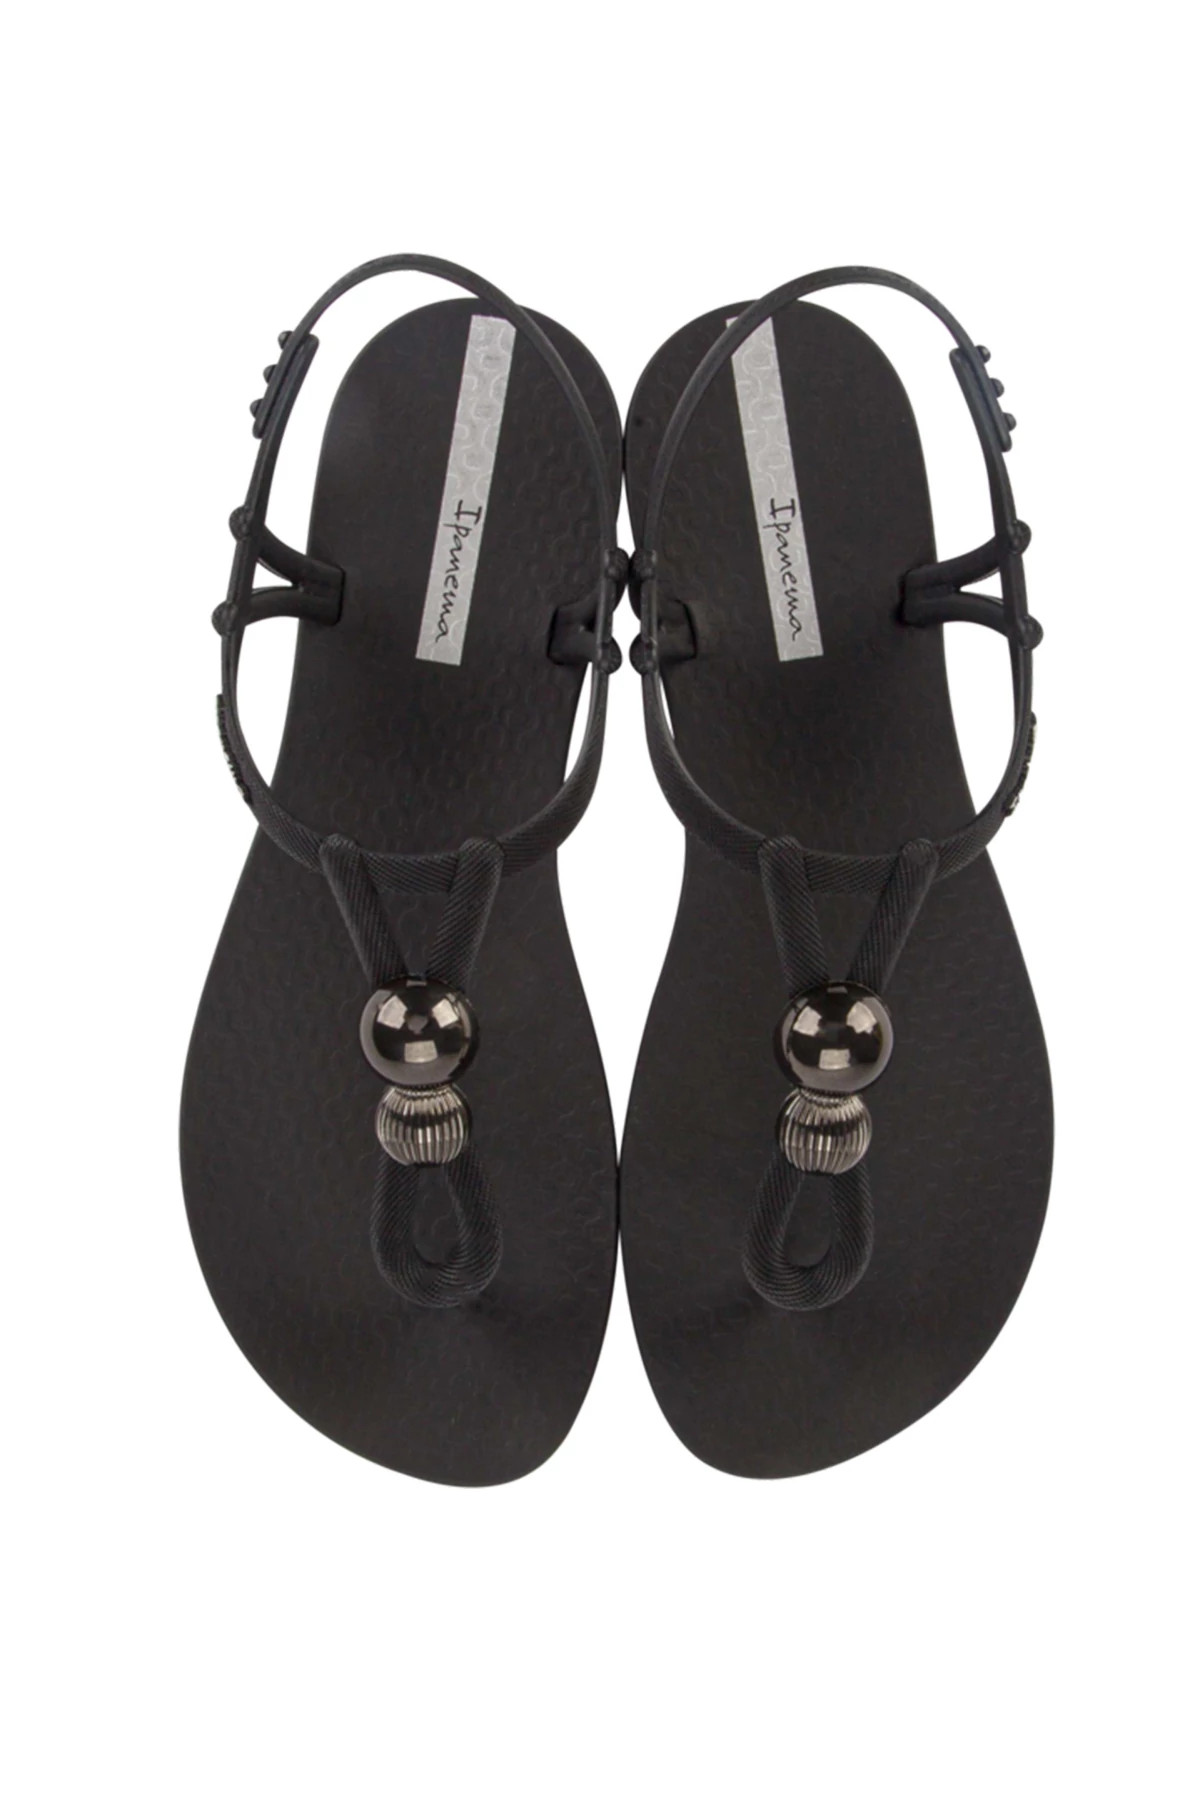 BLACK/SILVER Class Spheres Sandals image number 2